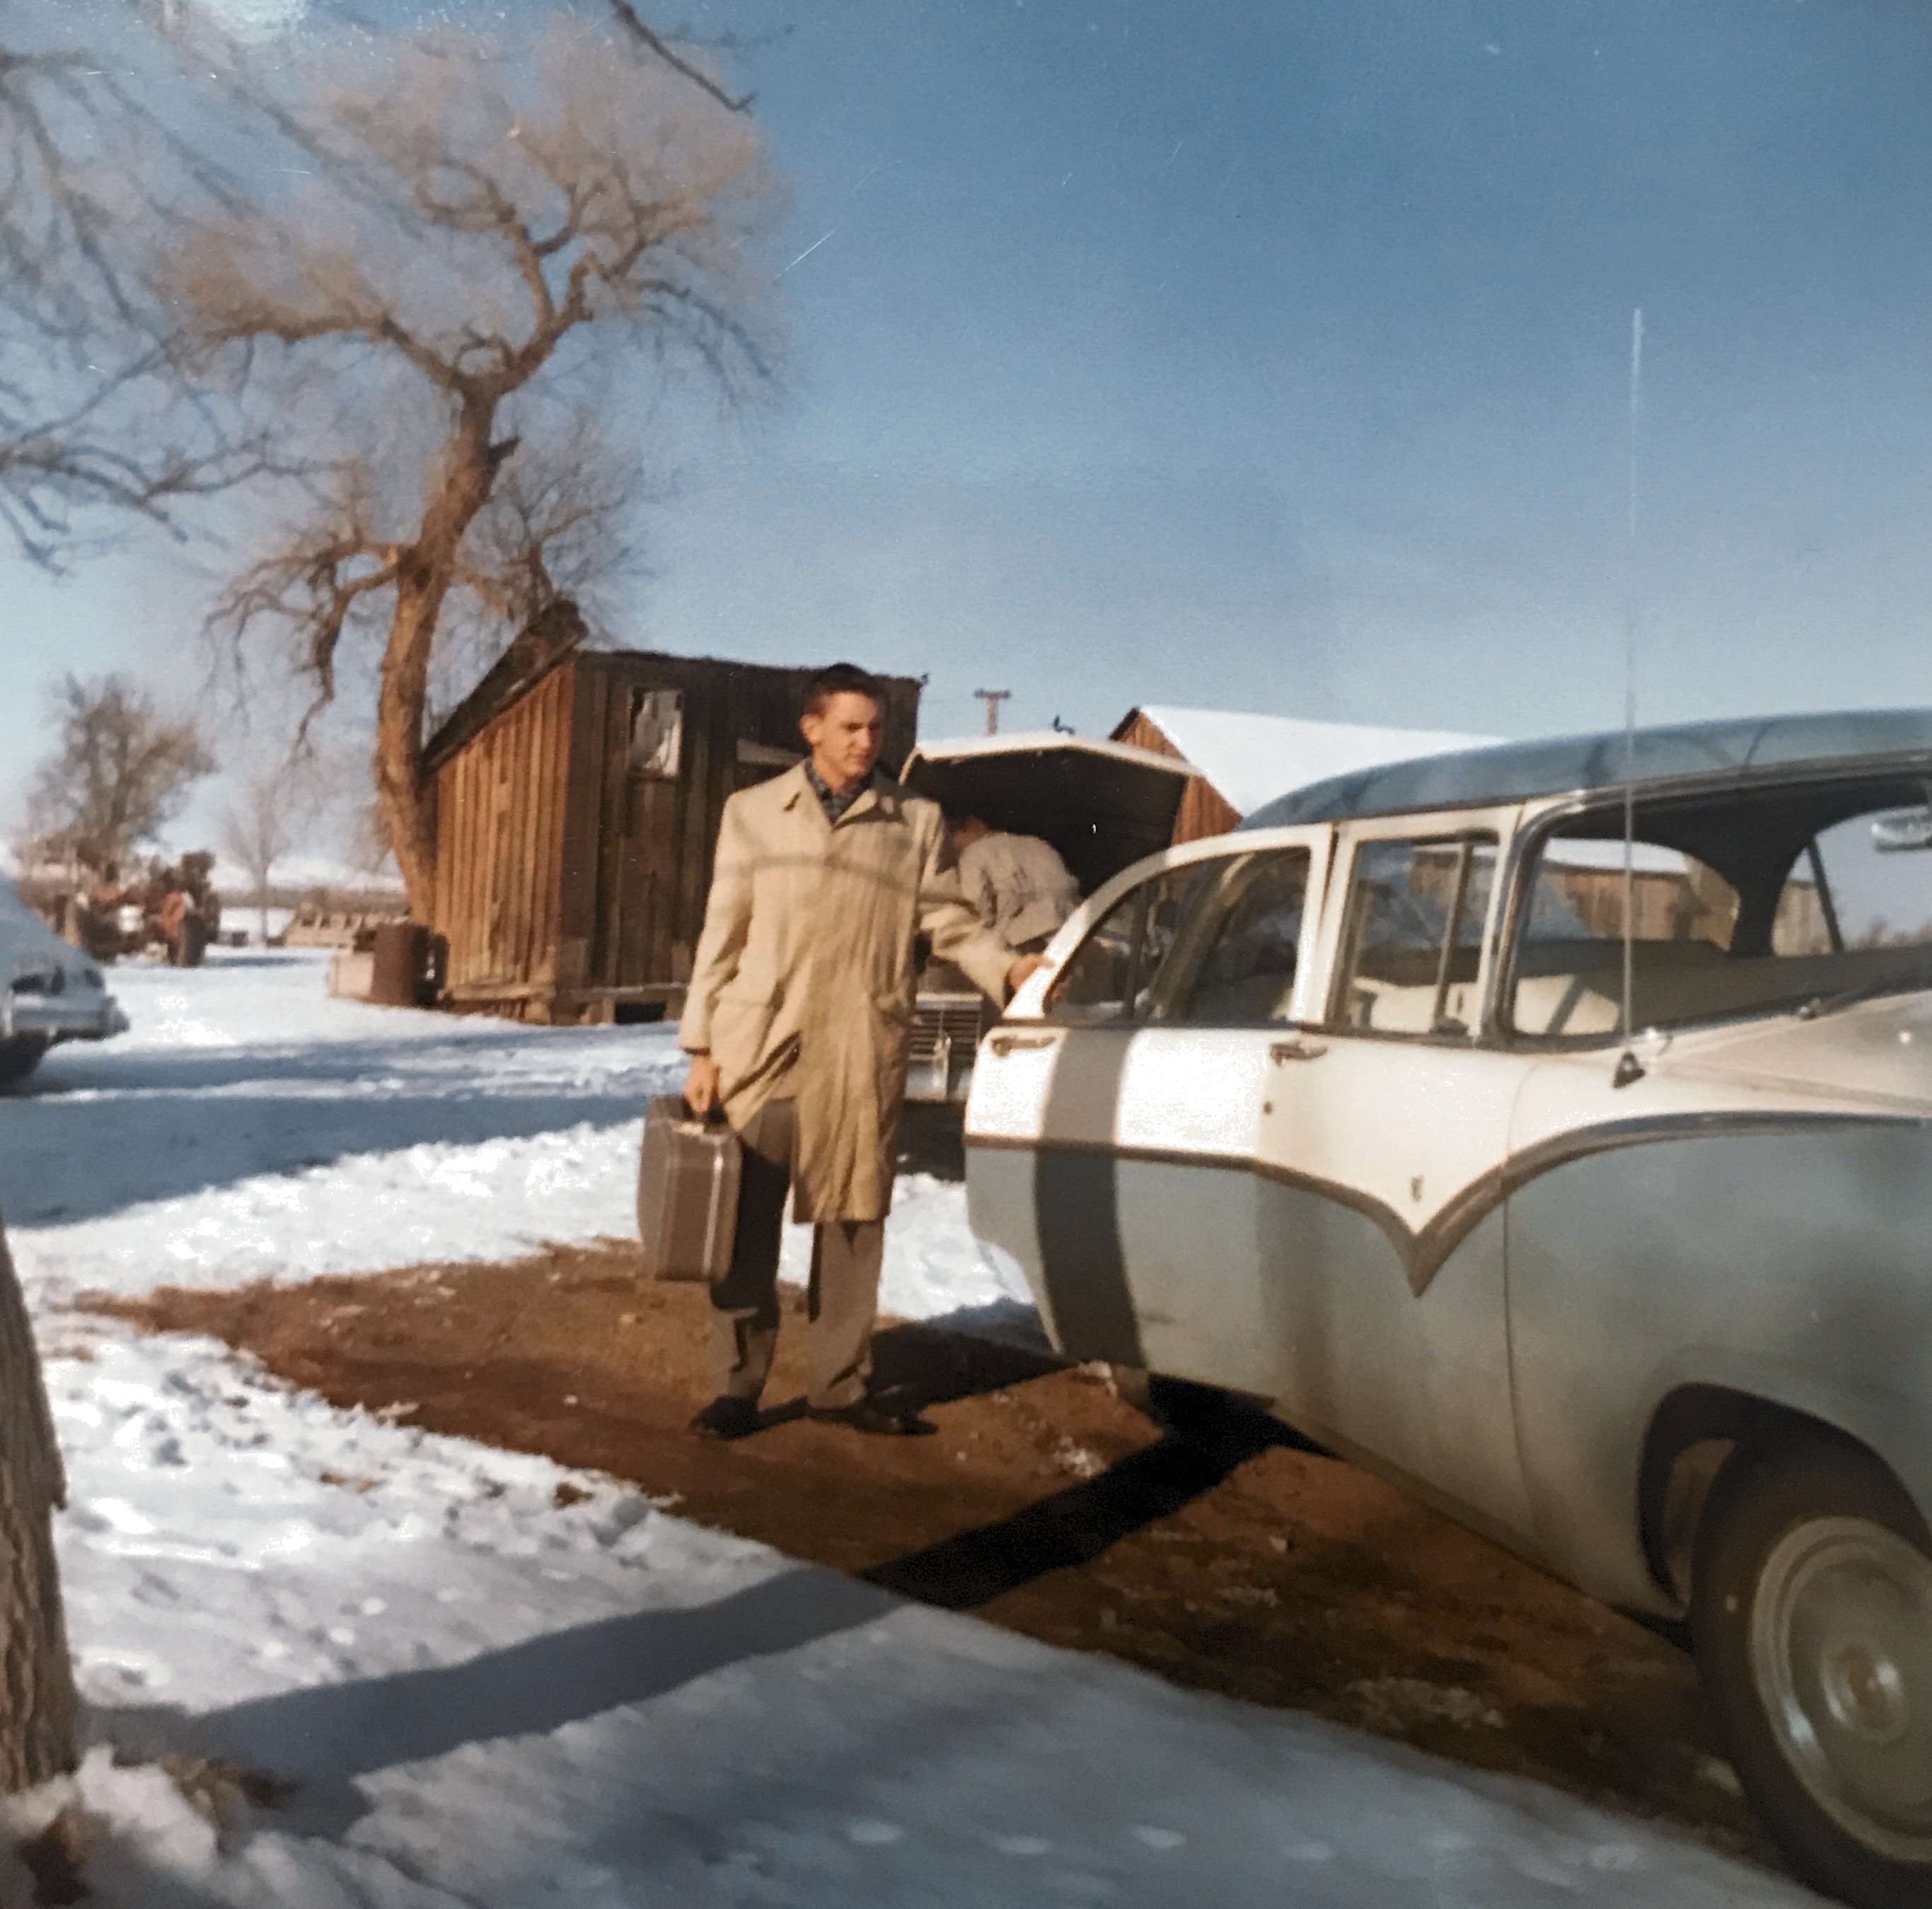 After Christmas 1959, leaving Bruneau for Mt Home to take the bus to Indianapolis, where he was stationed in the Army. 